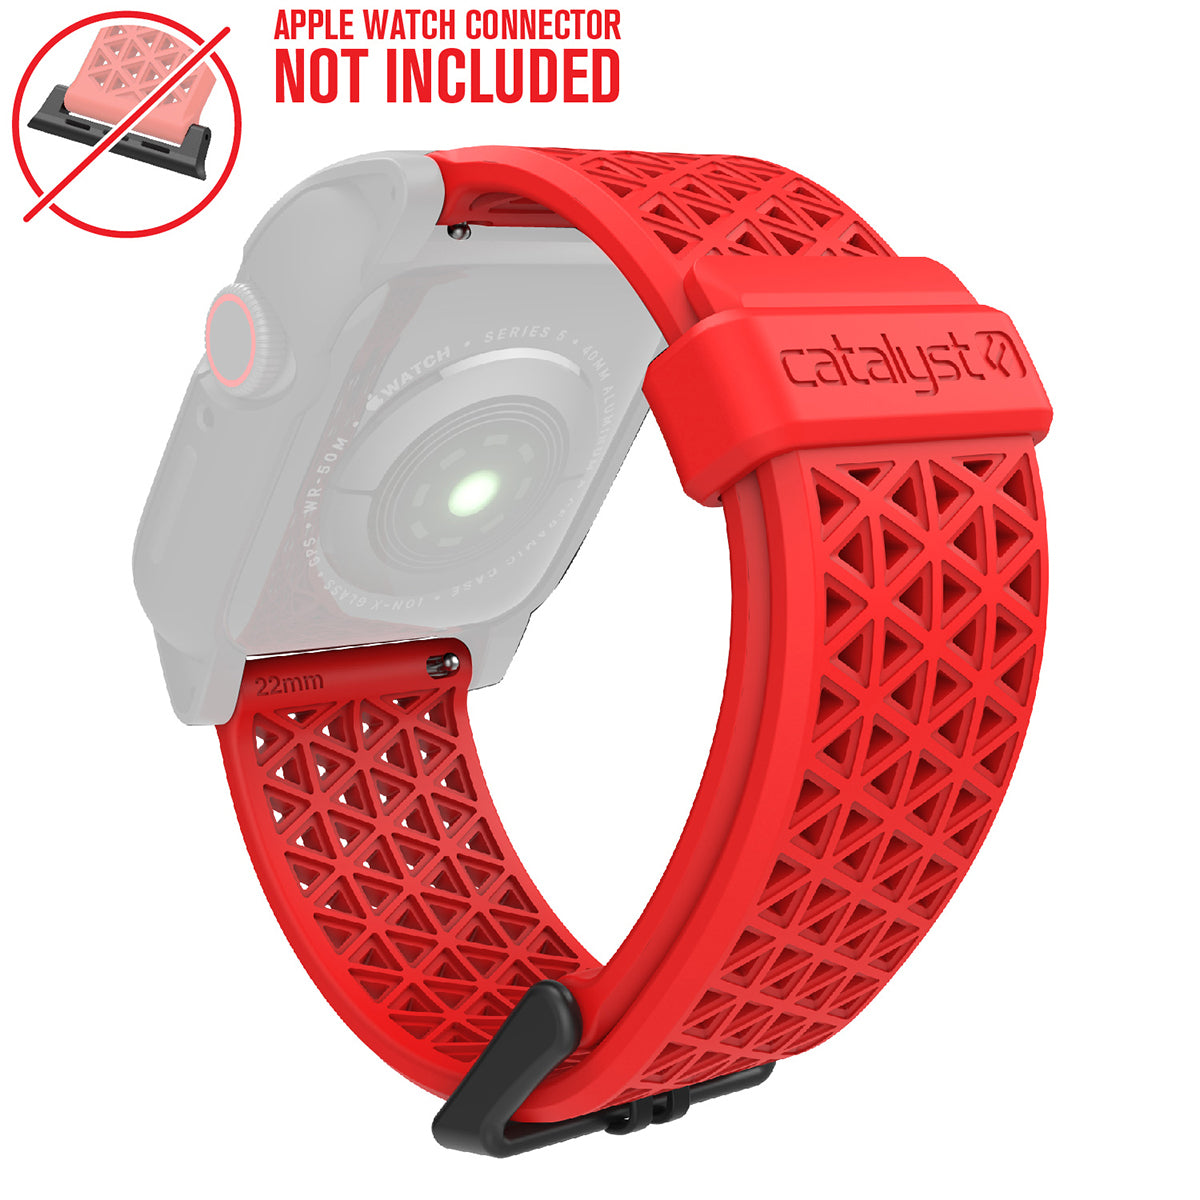 catalyst apple watch series 9 8 7 6 5 4 SE Gen 2 1 38 40 41mm sport band buckle edition catalyst sport band red text reads apple watch connector not included